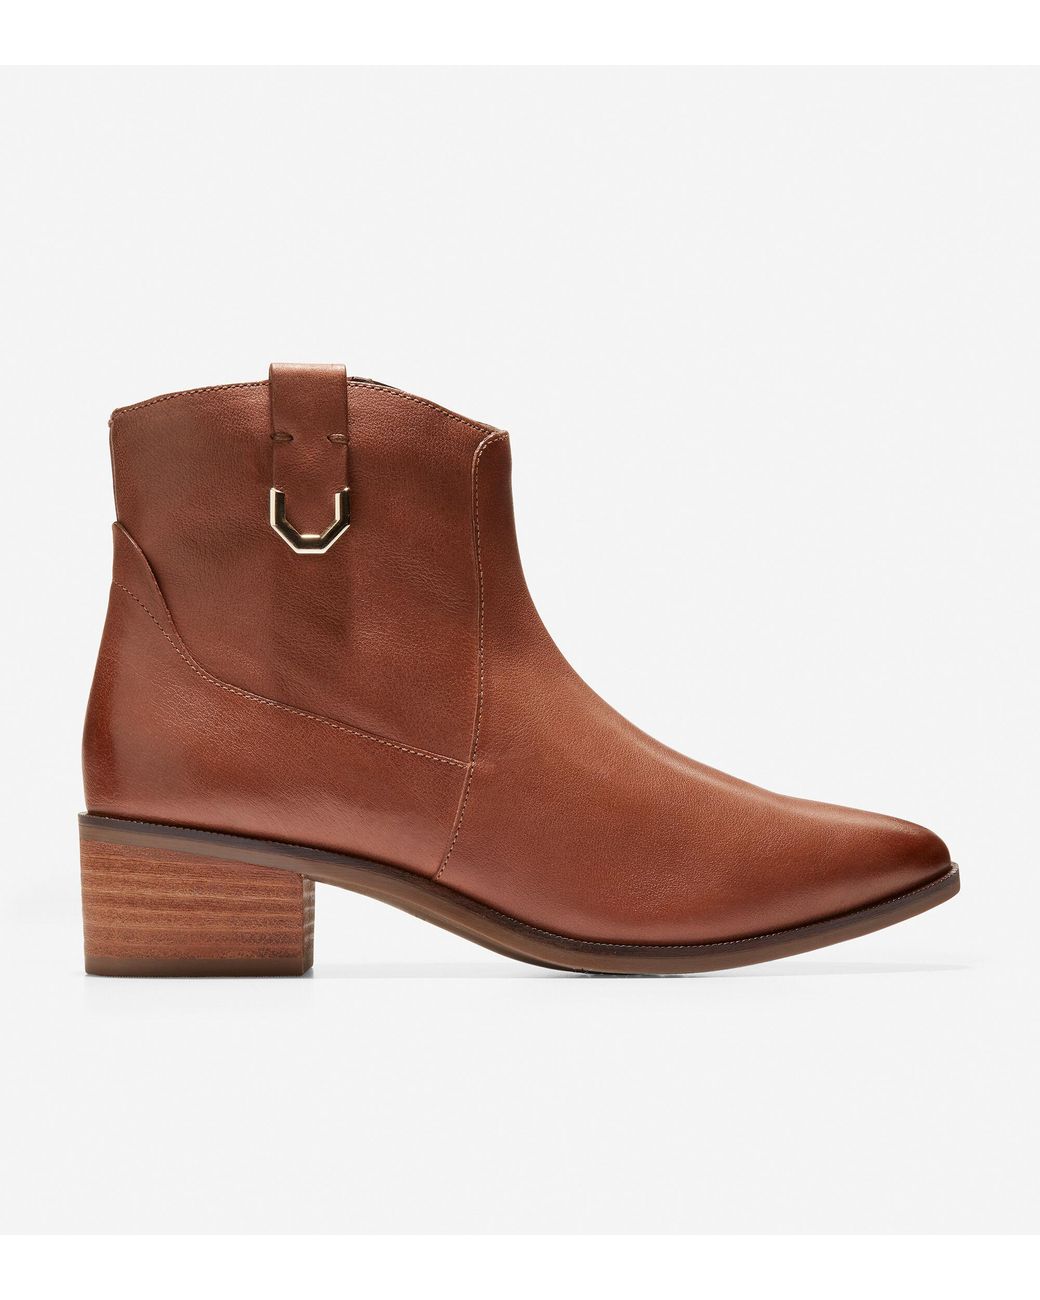 Cole Haan Leather Maci Bootie in Brown - Lyst